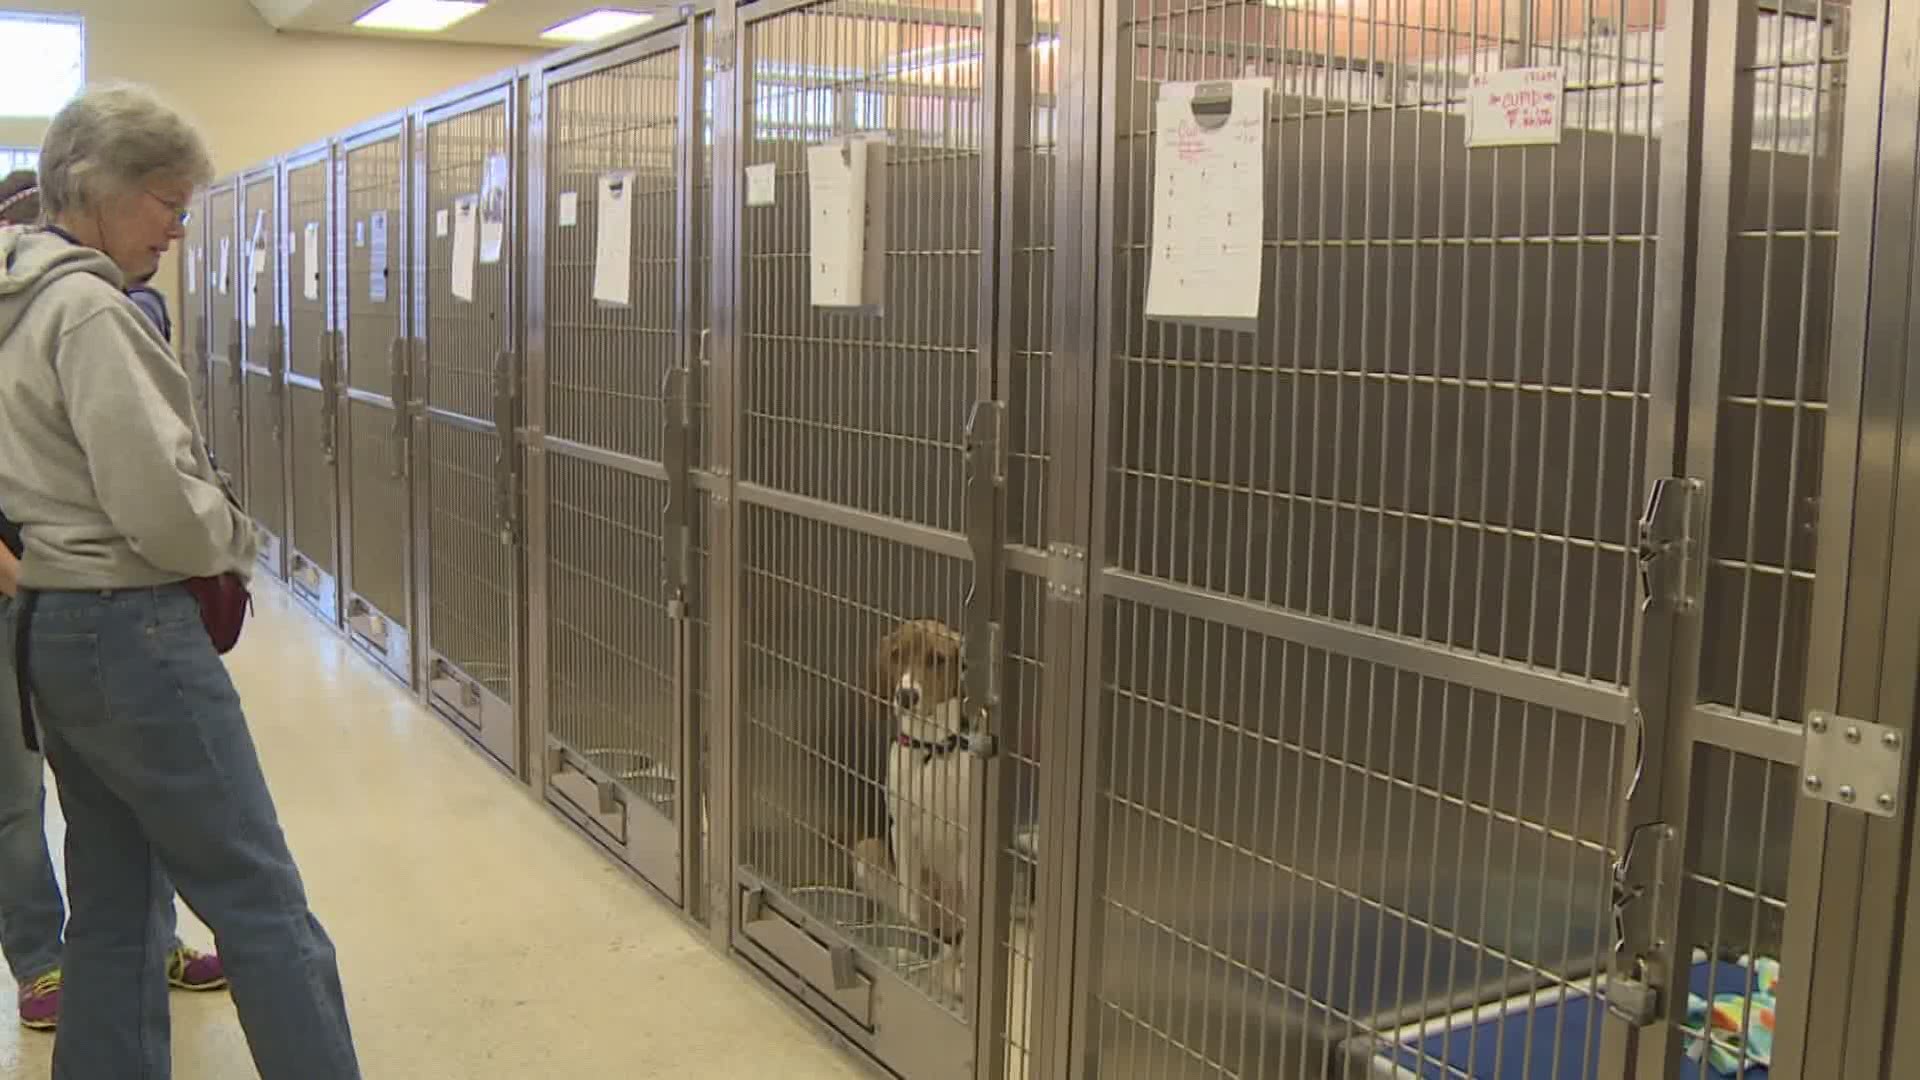 Adoption fees fees for adult dogs, cats, and kittens have been reduced to $25.